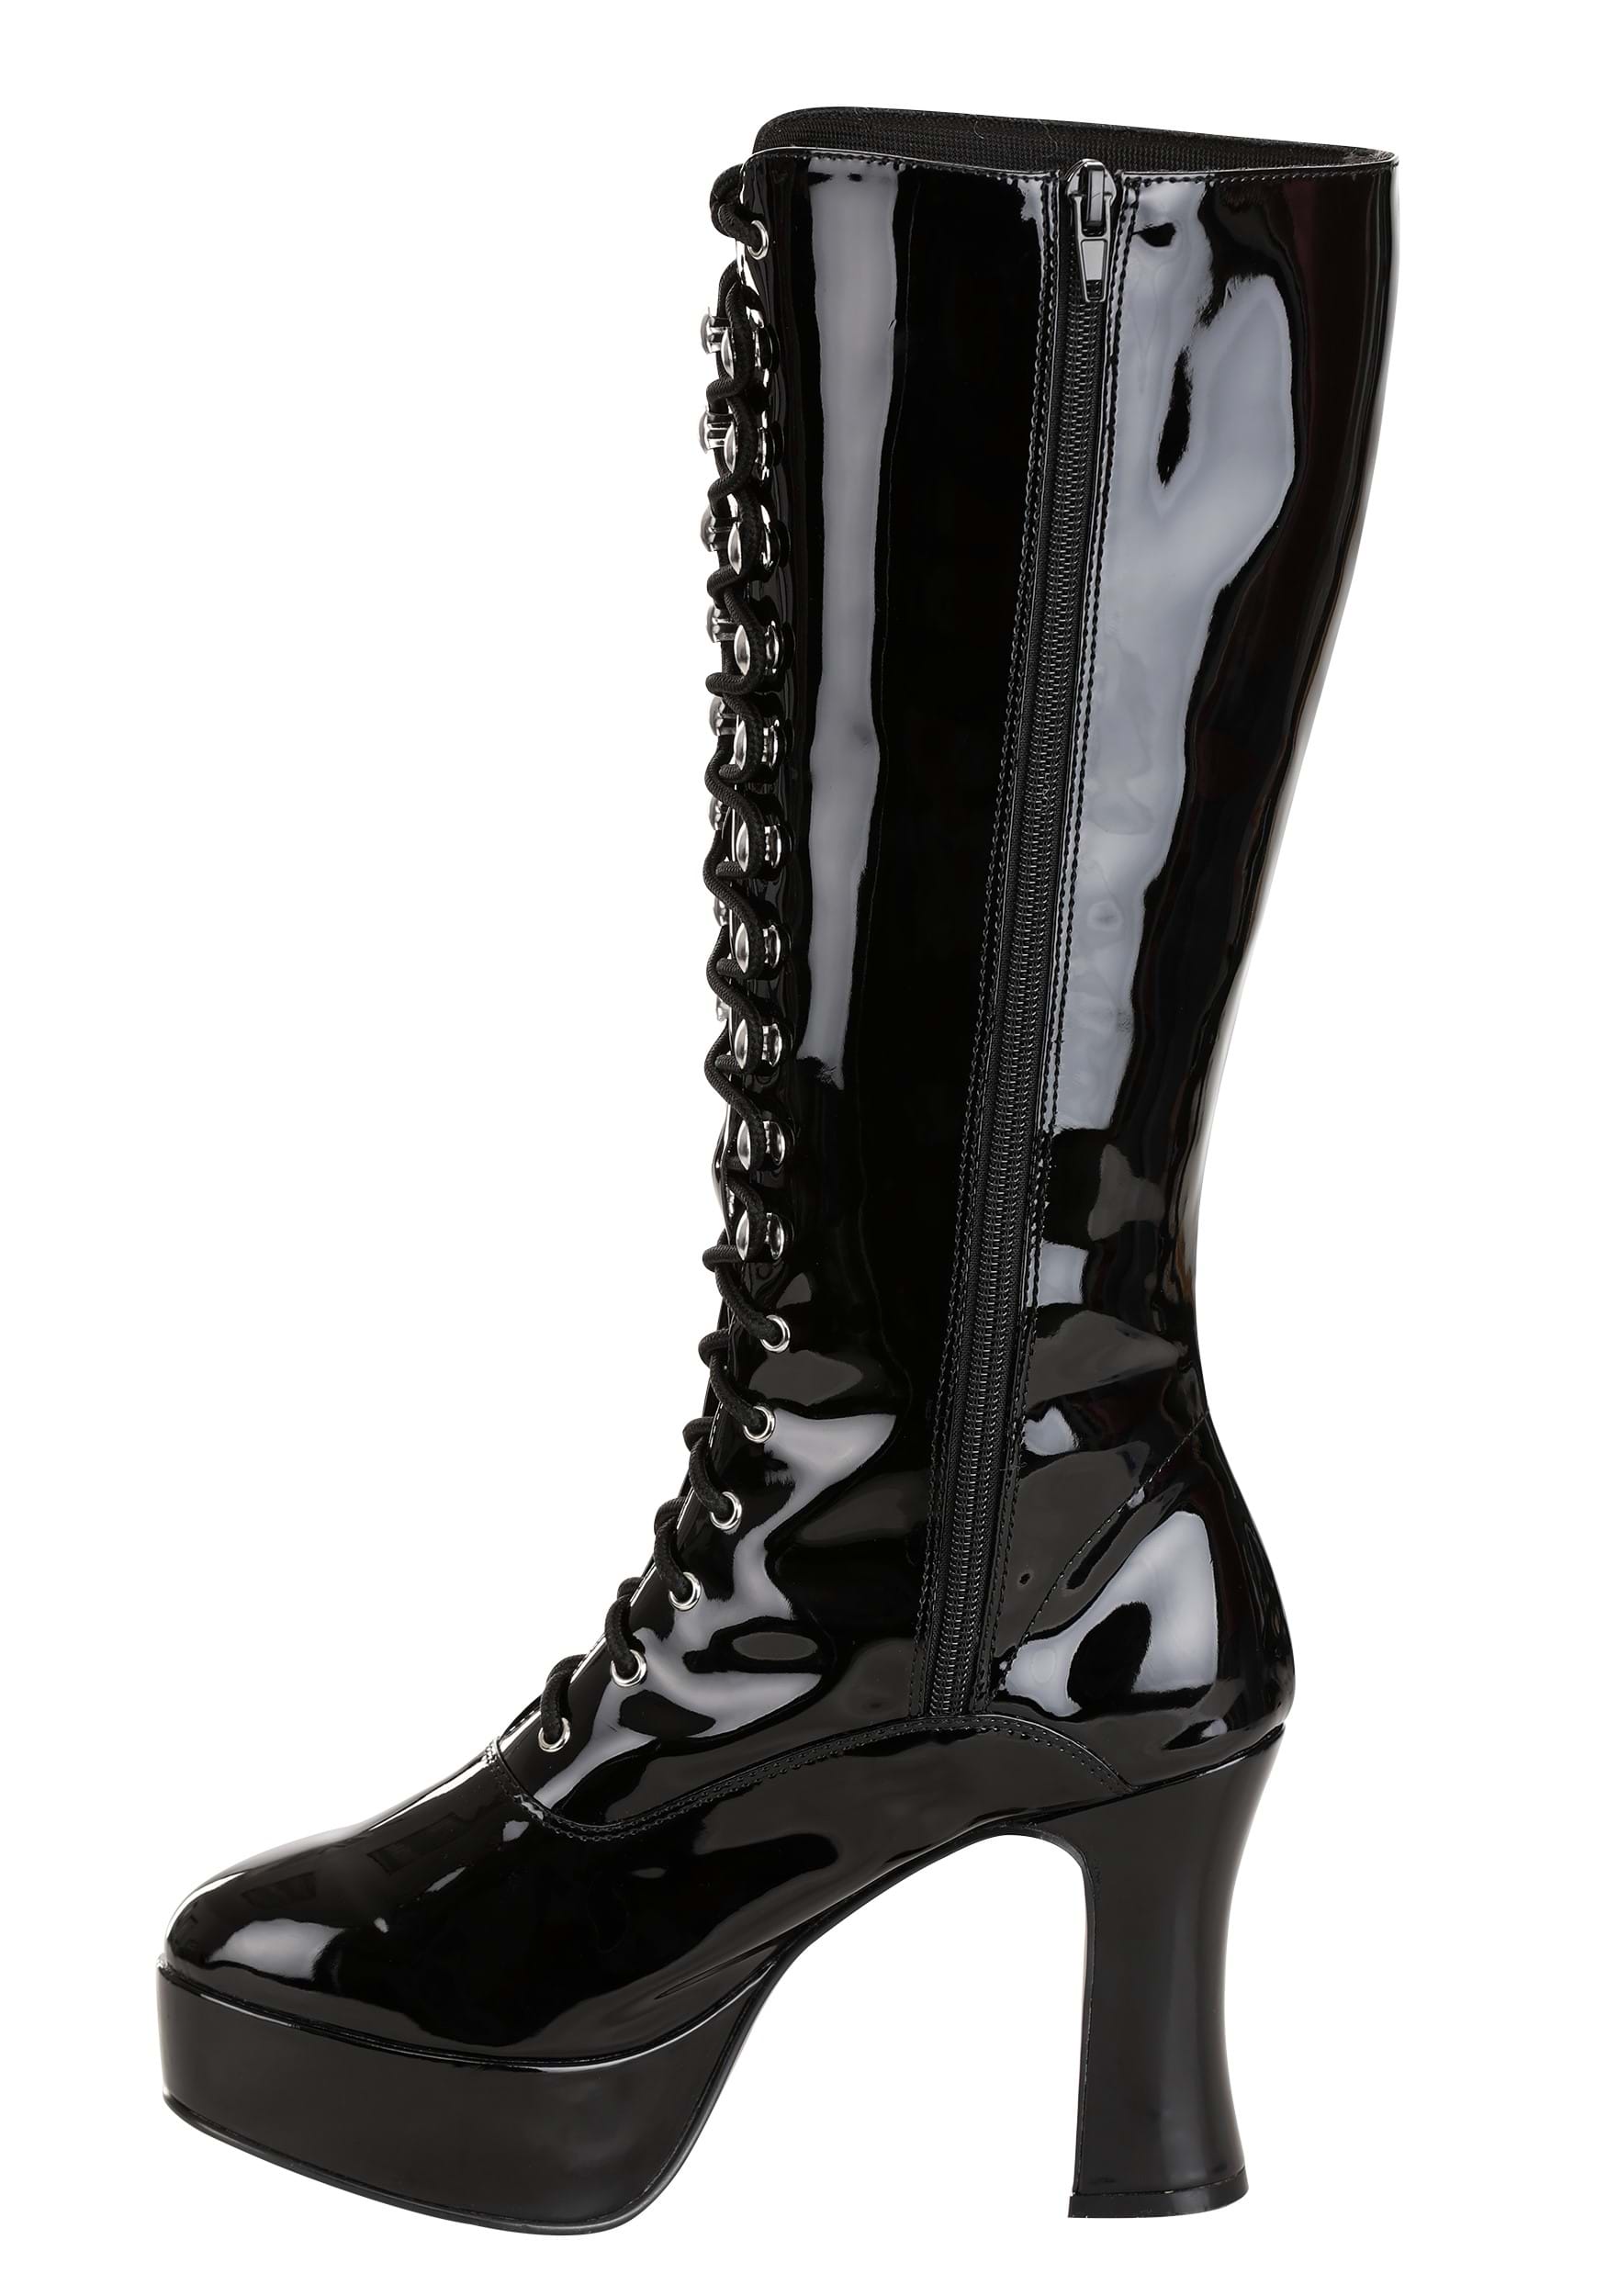 Adult Sexy Black Faux Leather Knee High Boots